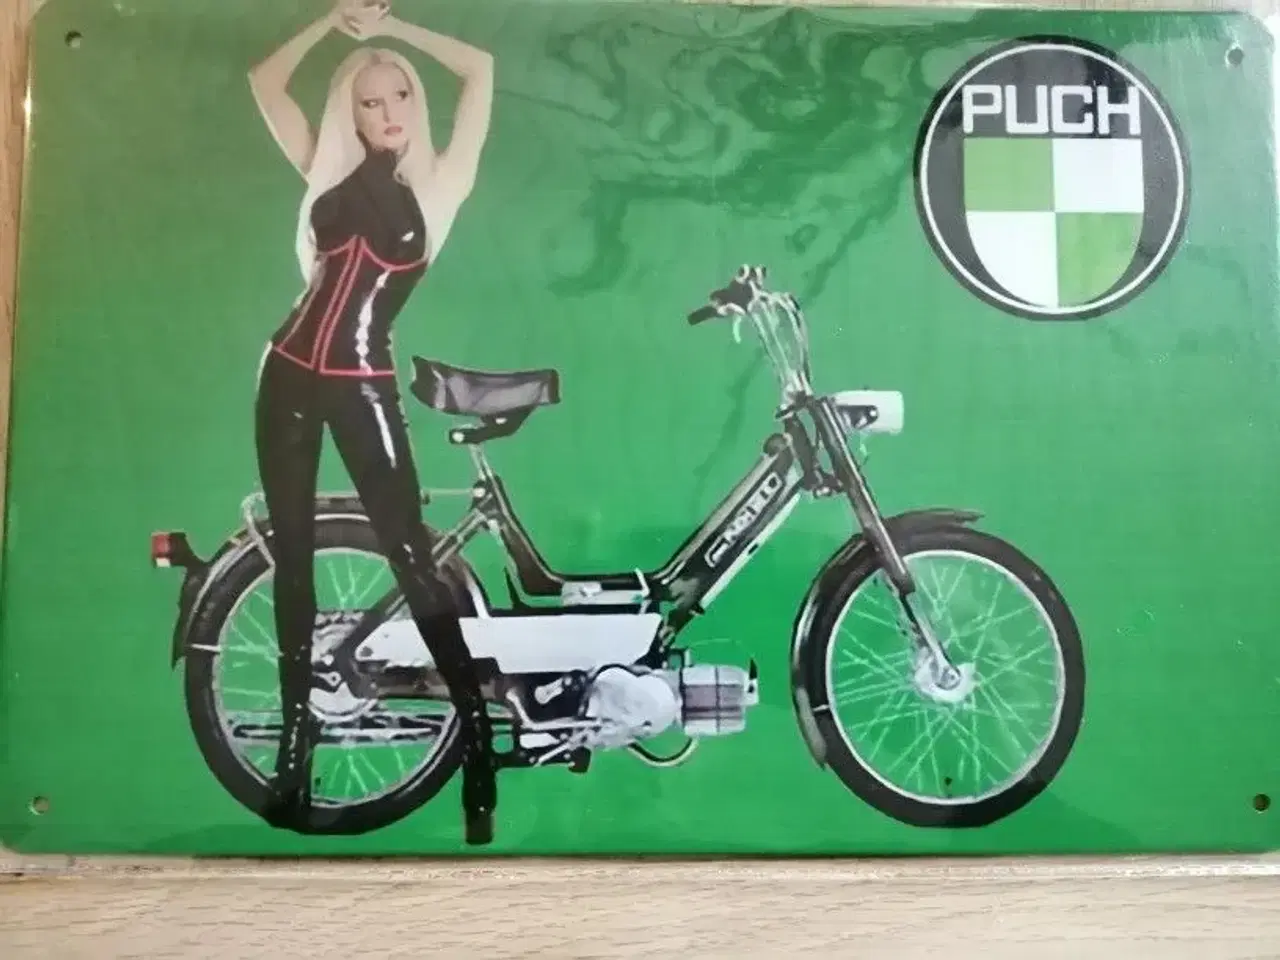 Billede 11 - puch maxi, puch mz50, puch monza juvel, puch ms50 